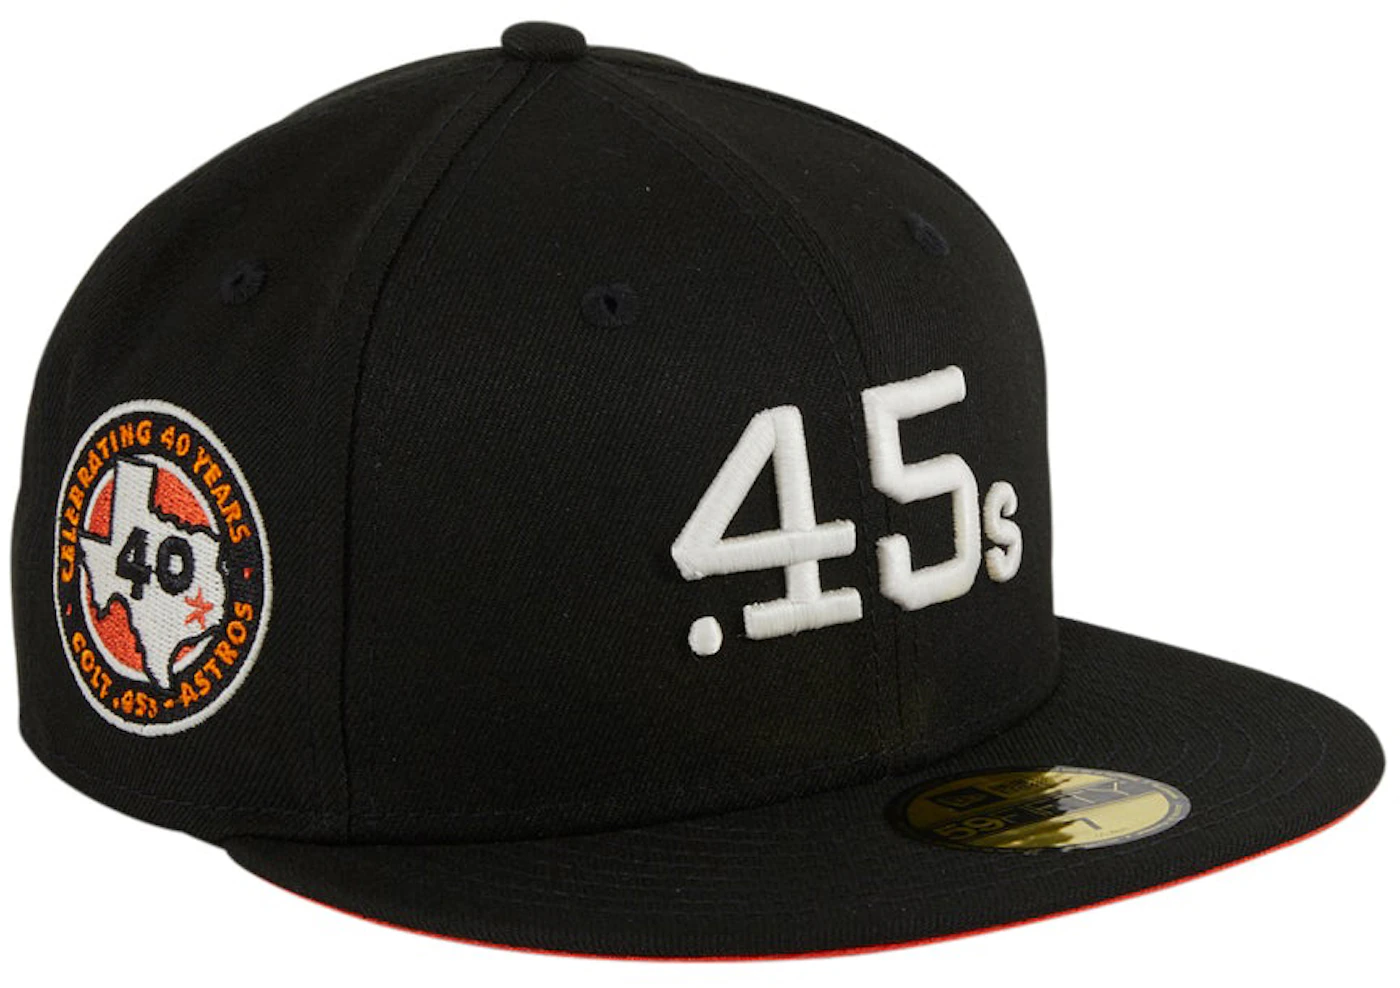 New Era Houston Astros Glow My God Colt 45s Patch Hat Club Exclusive  59Fifty Fitted Hat Black Men's - FW21 - US